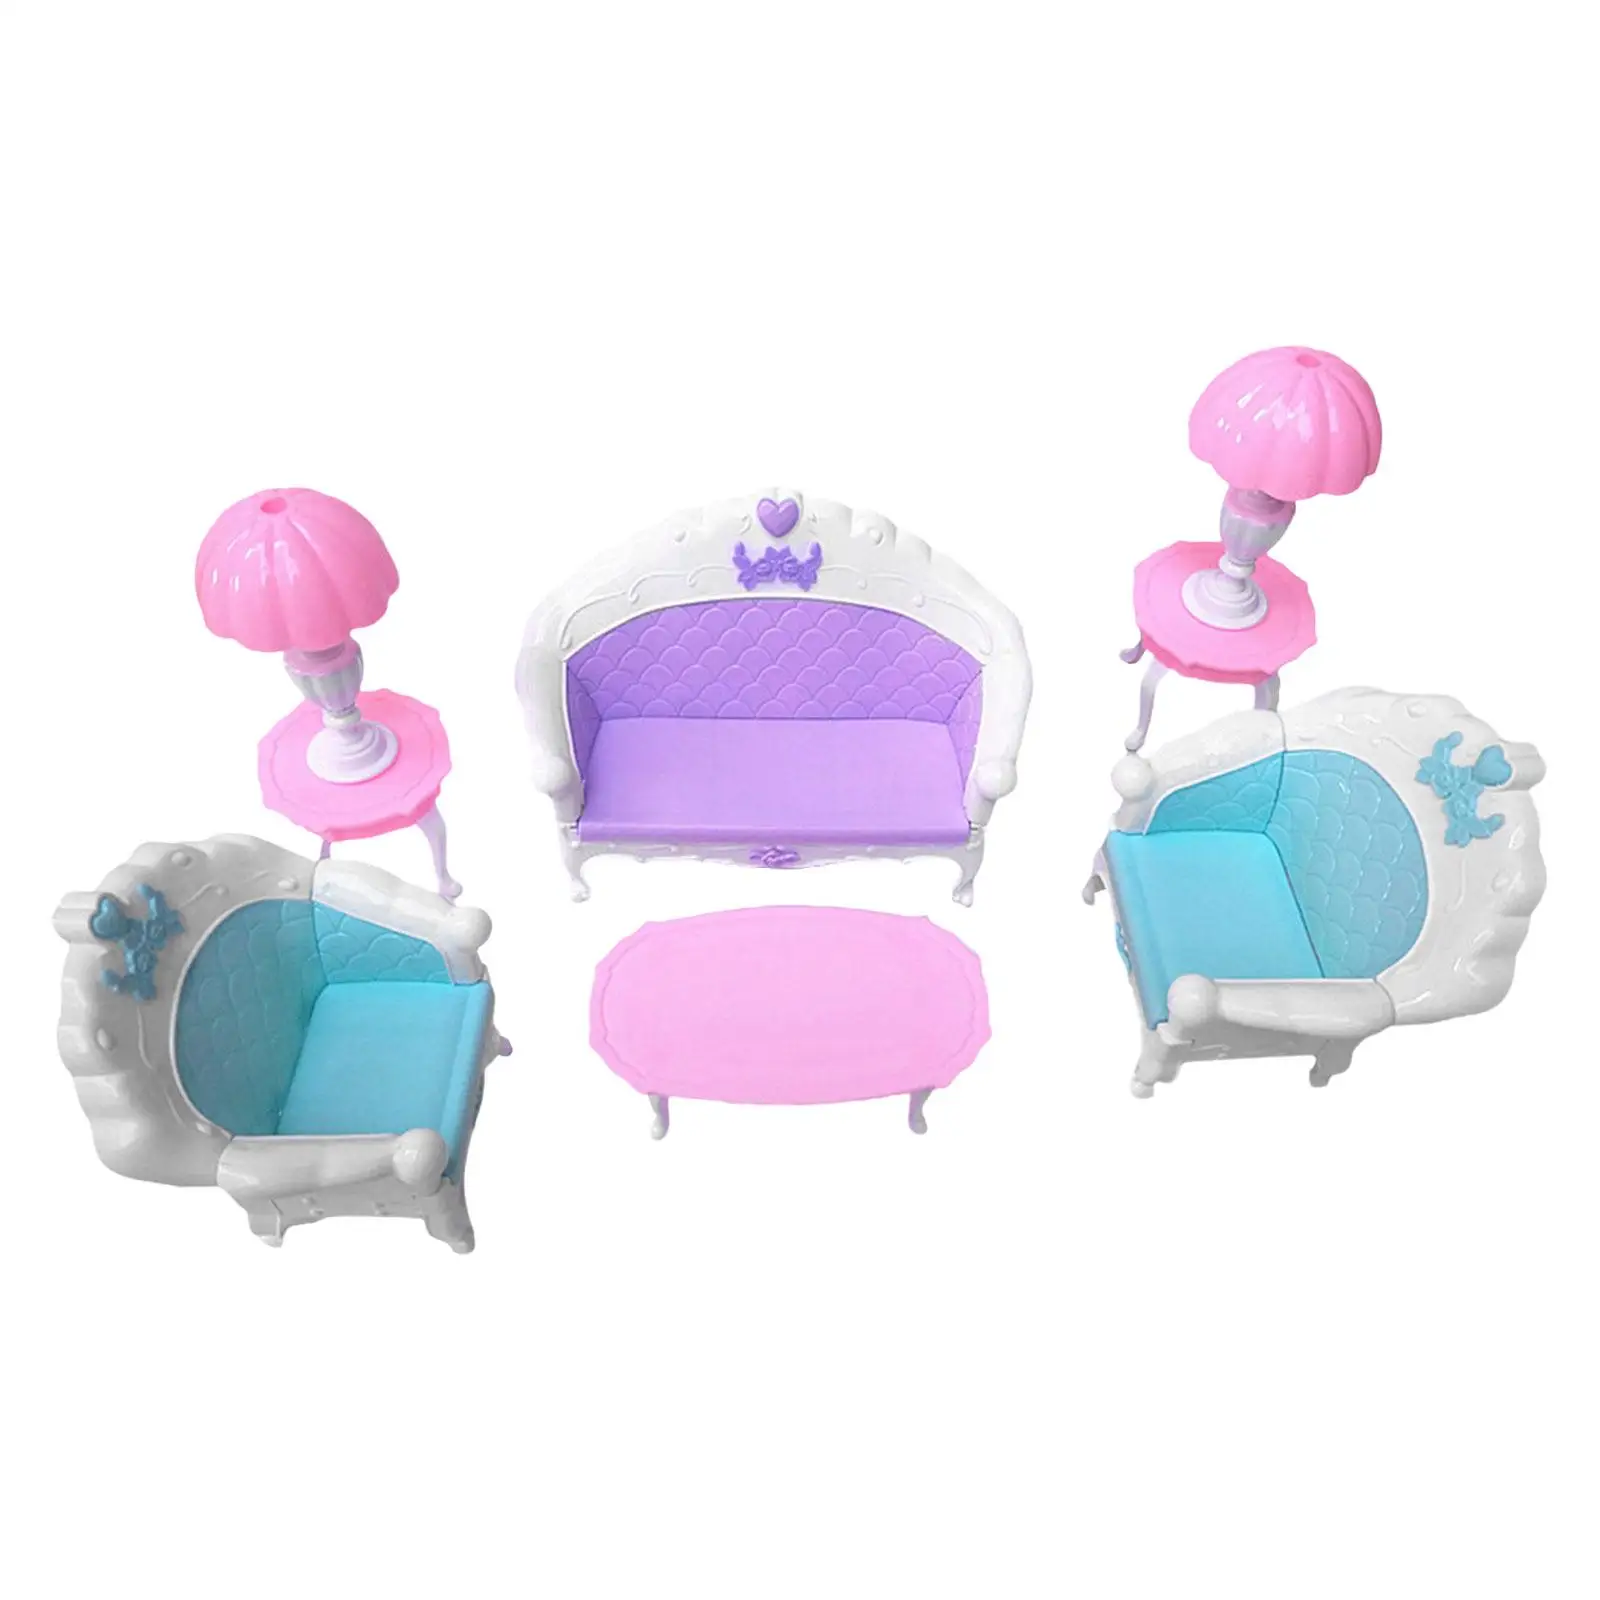 Doll Furniture Set Pretend Play Doll House Furniture Toys for Doll DIY Scene